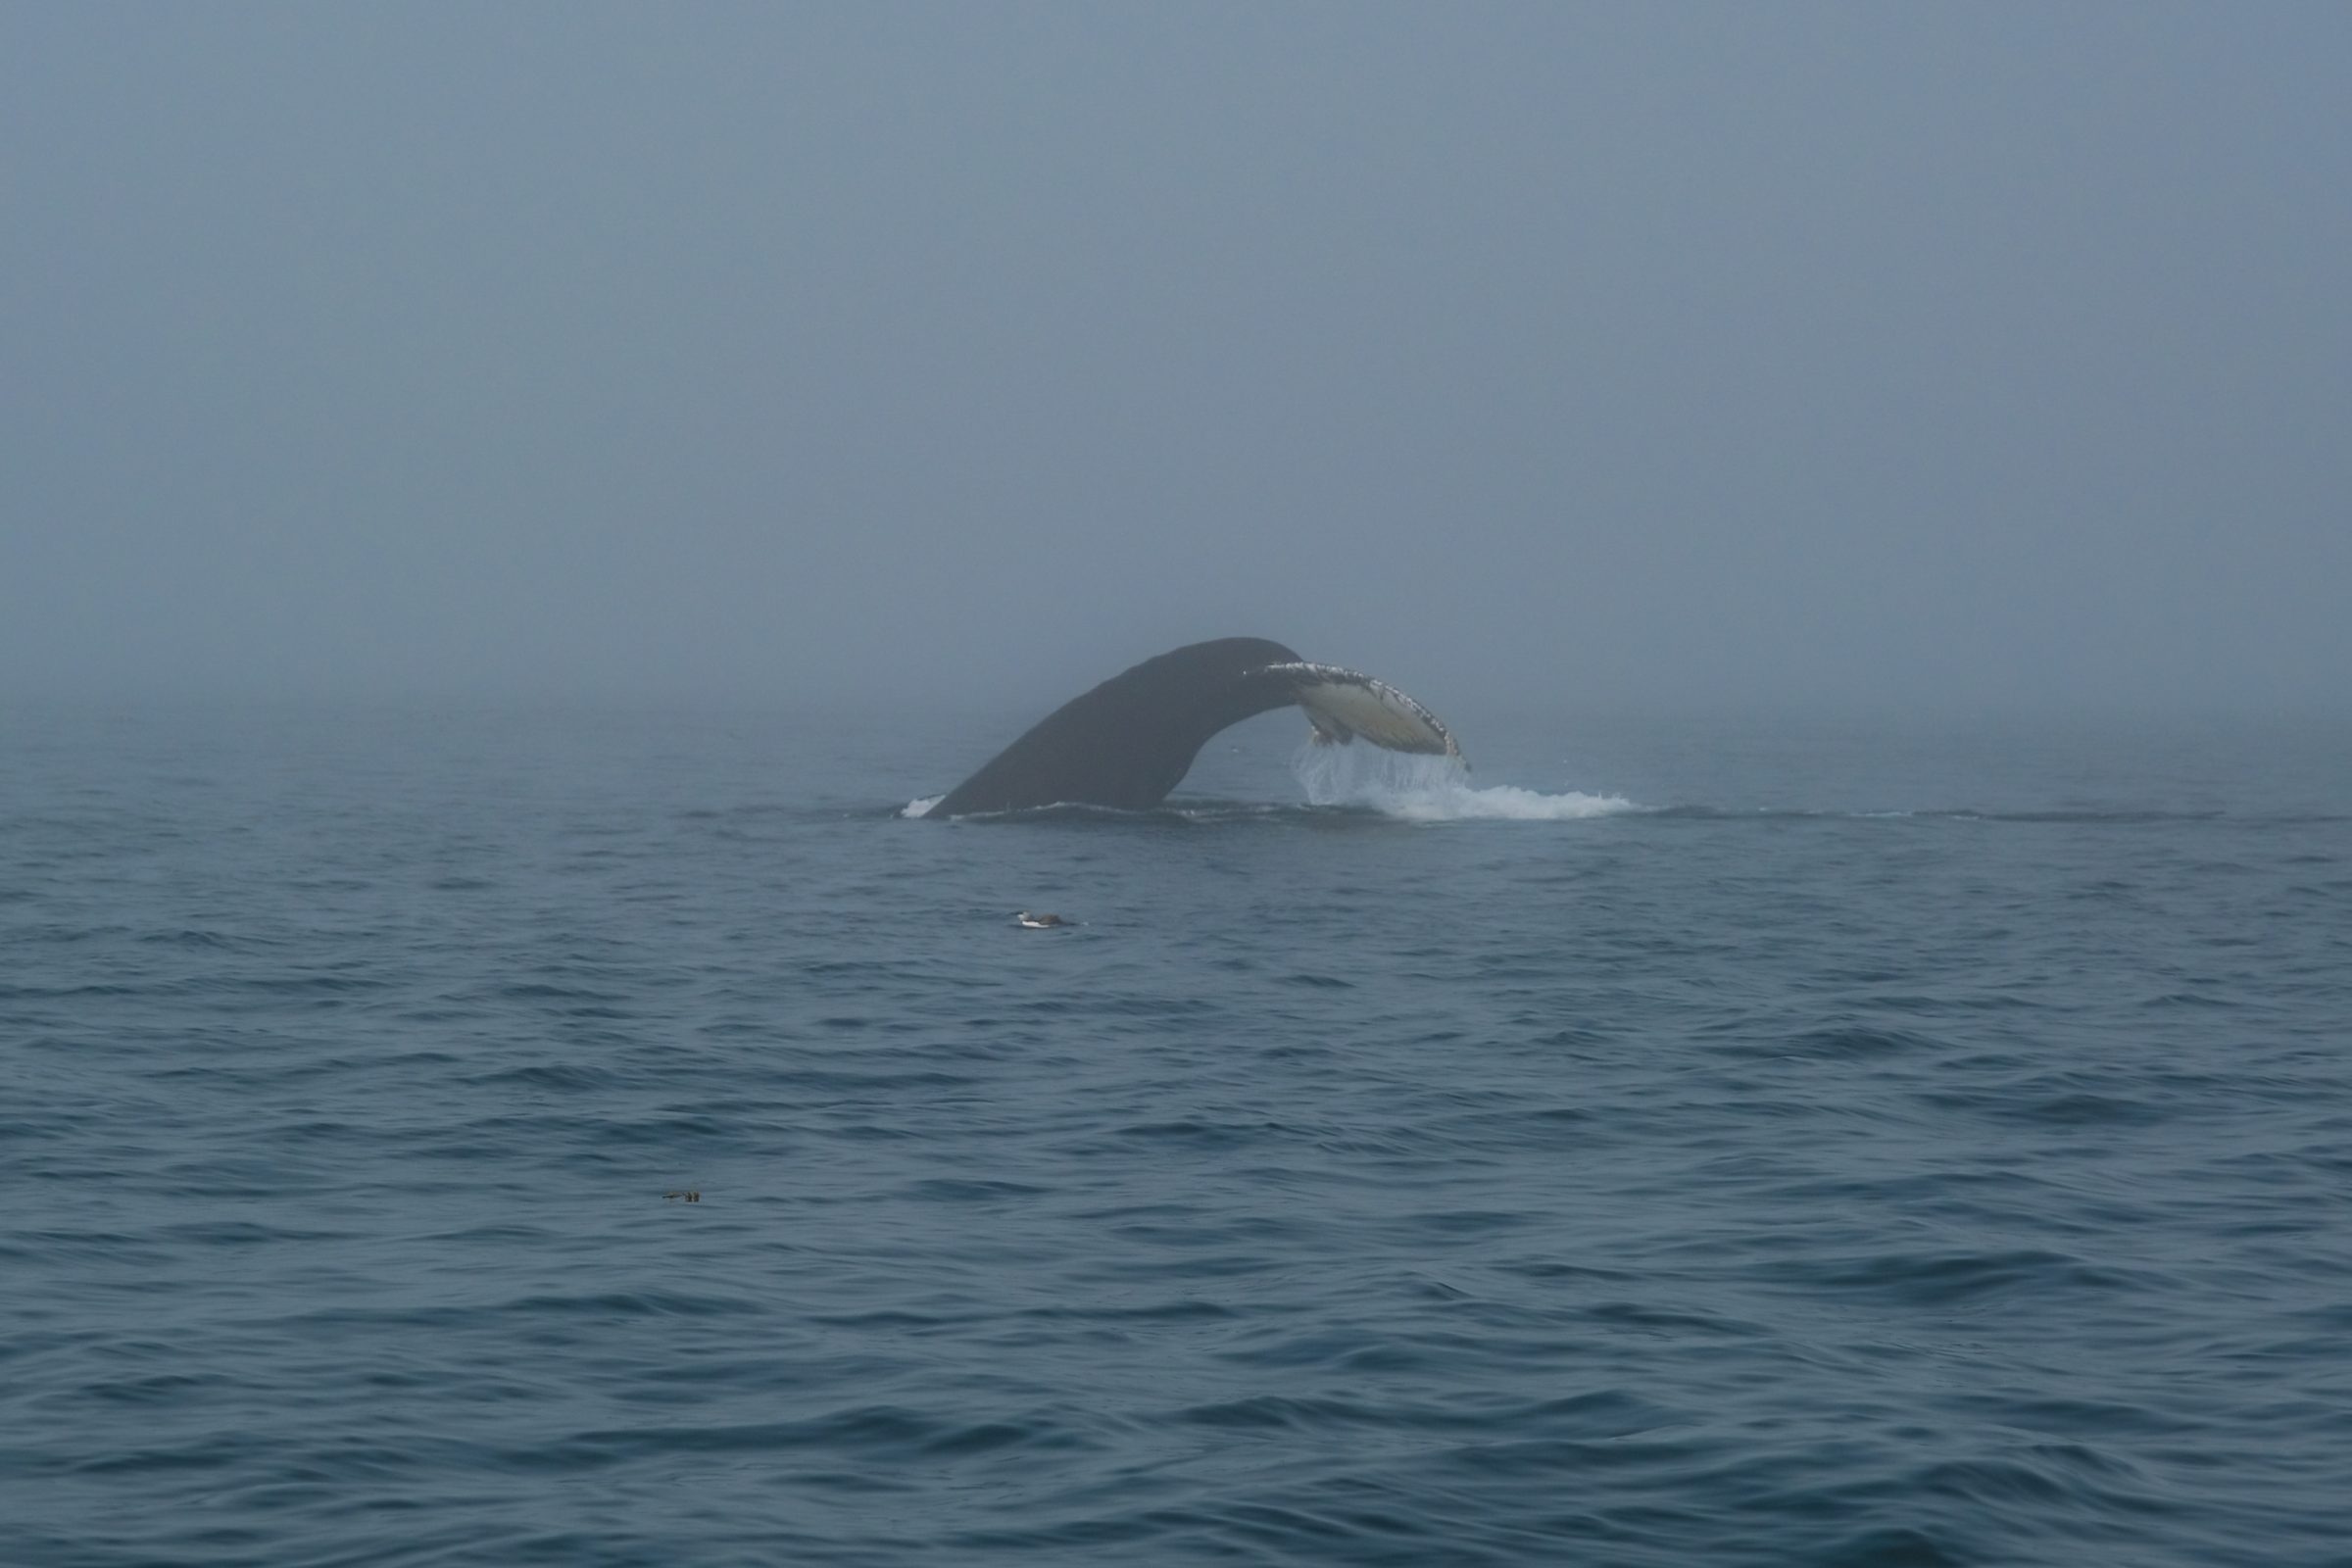 There goes the humpback whale! Beautiful to see that tail in the air like this